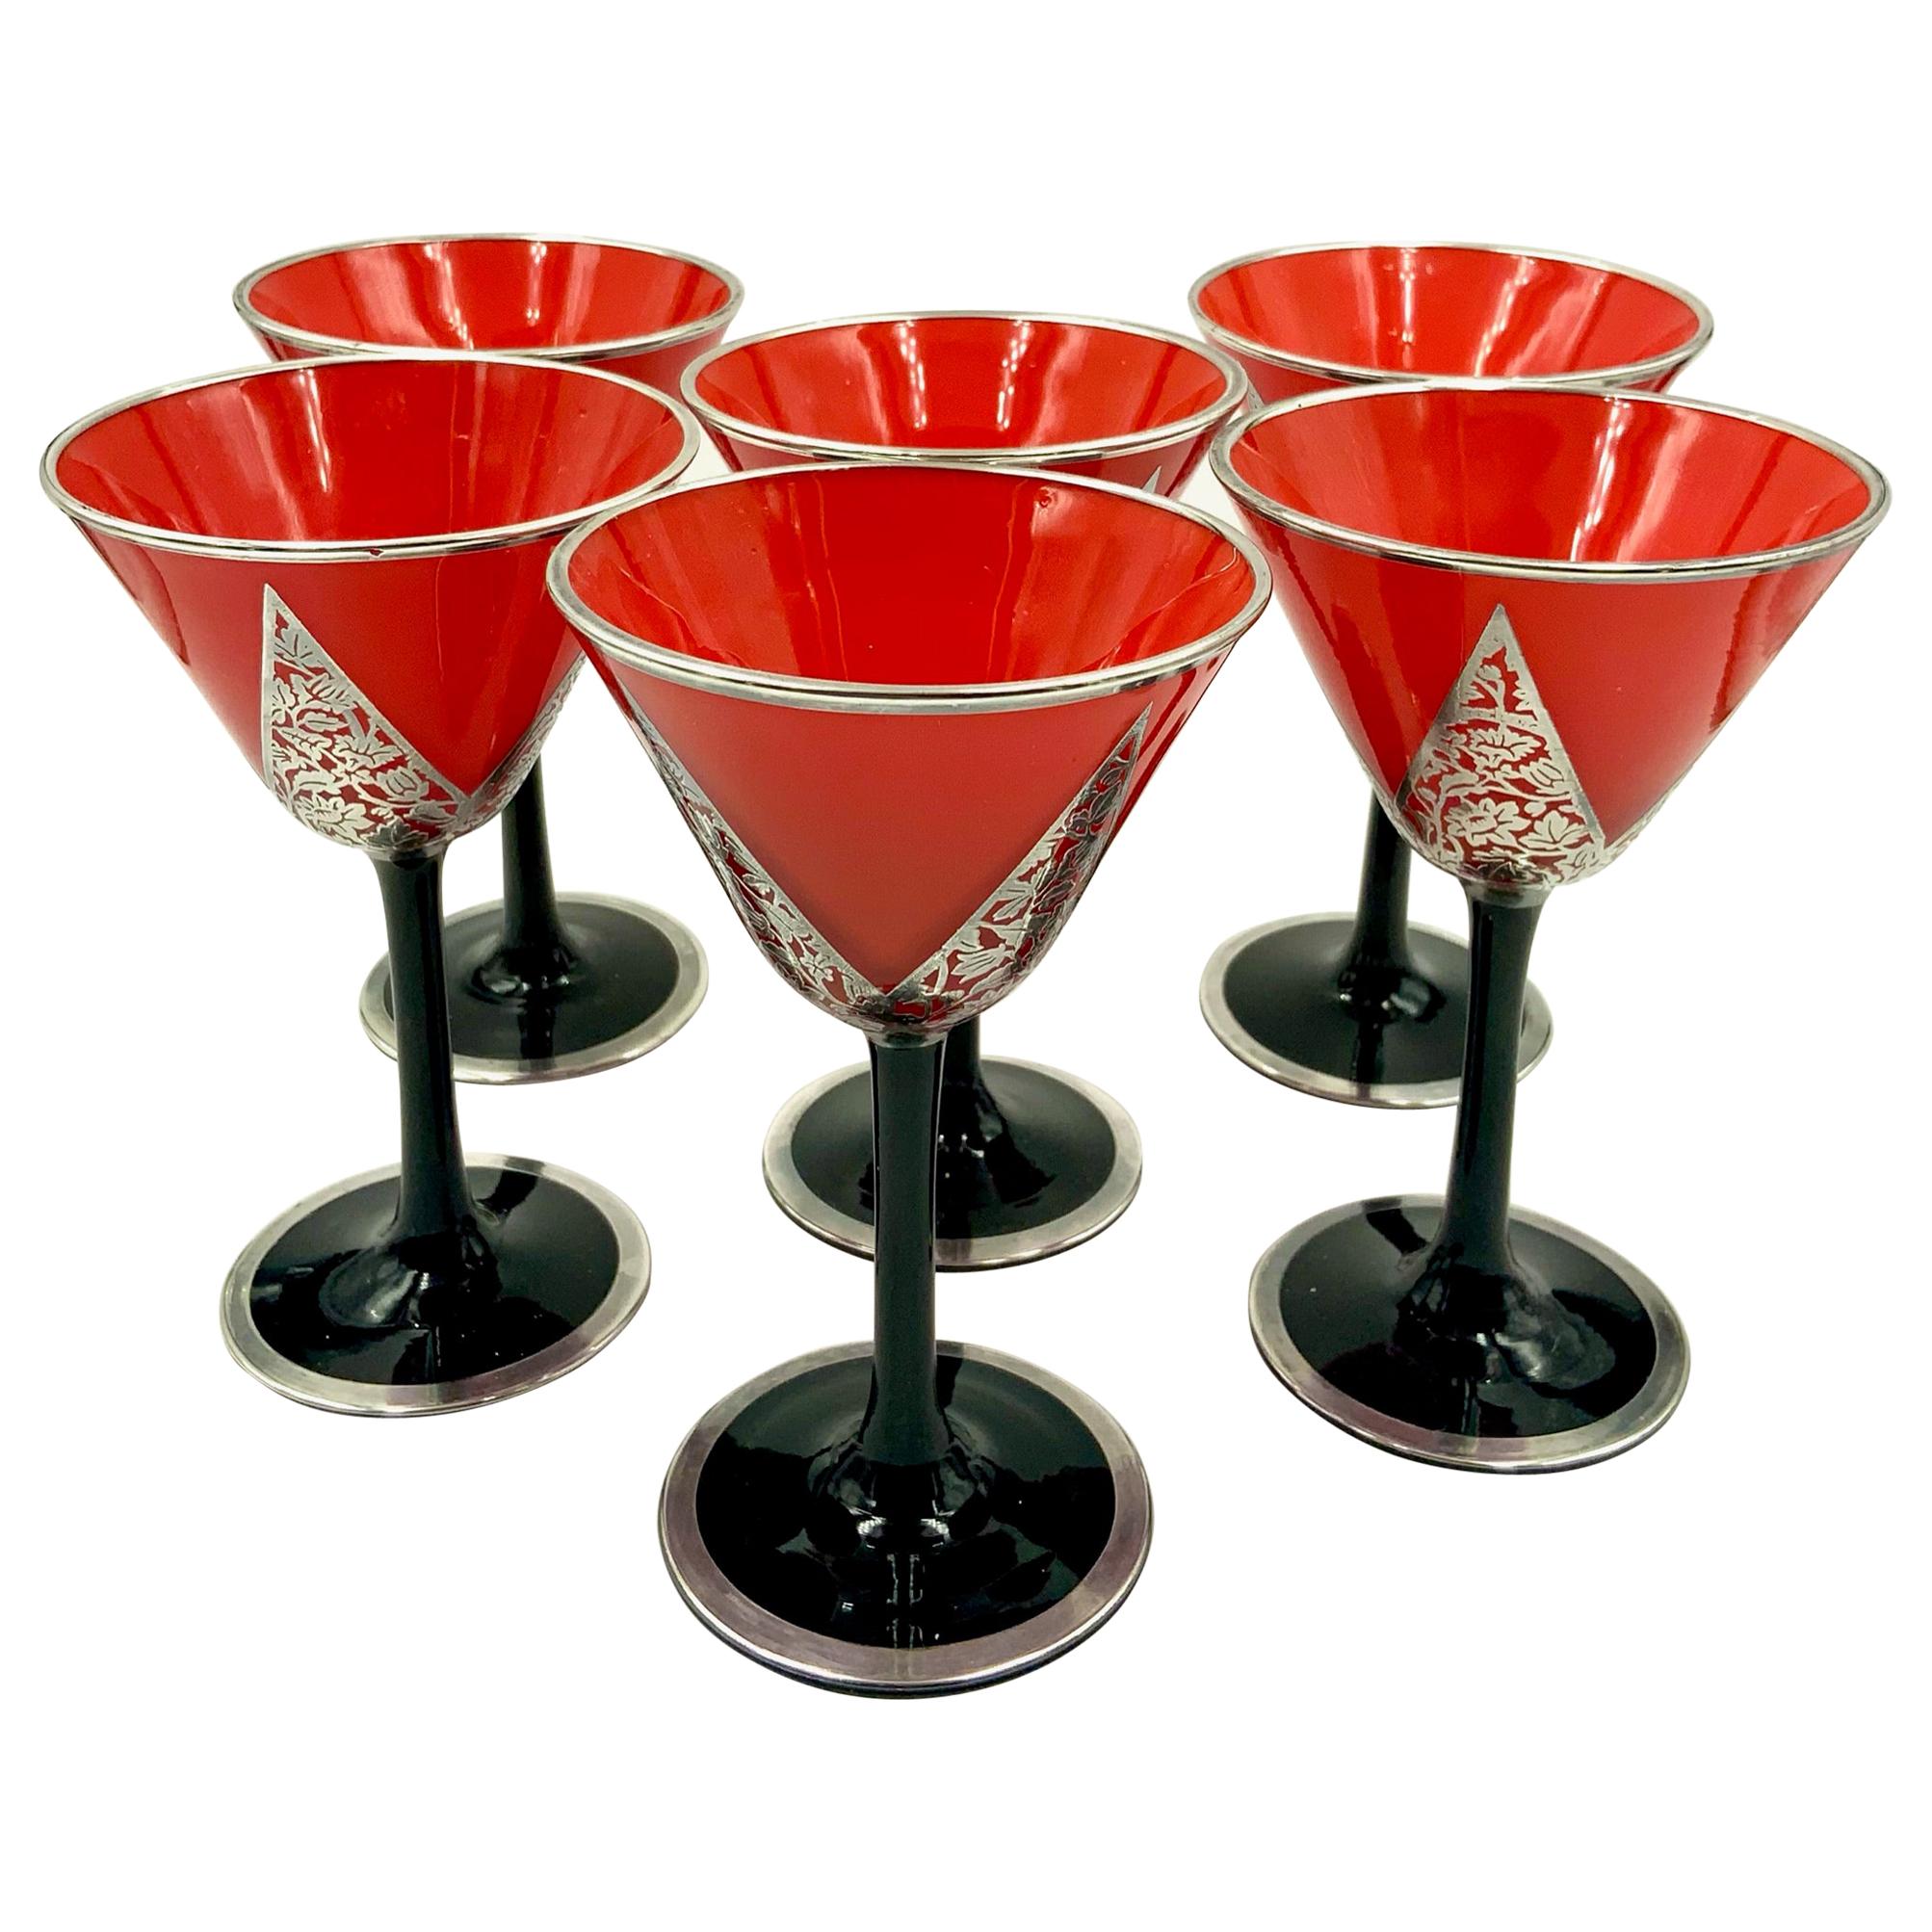 Beautiful Art Deco Rockwell Silver overlay orange & black glass
Stunning set of 6 art deco orange and black glasses with applied sterling silver overlay with floral and geometric design. They are acid signed Rockwell with the shield. They measure